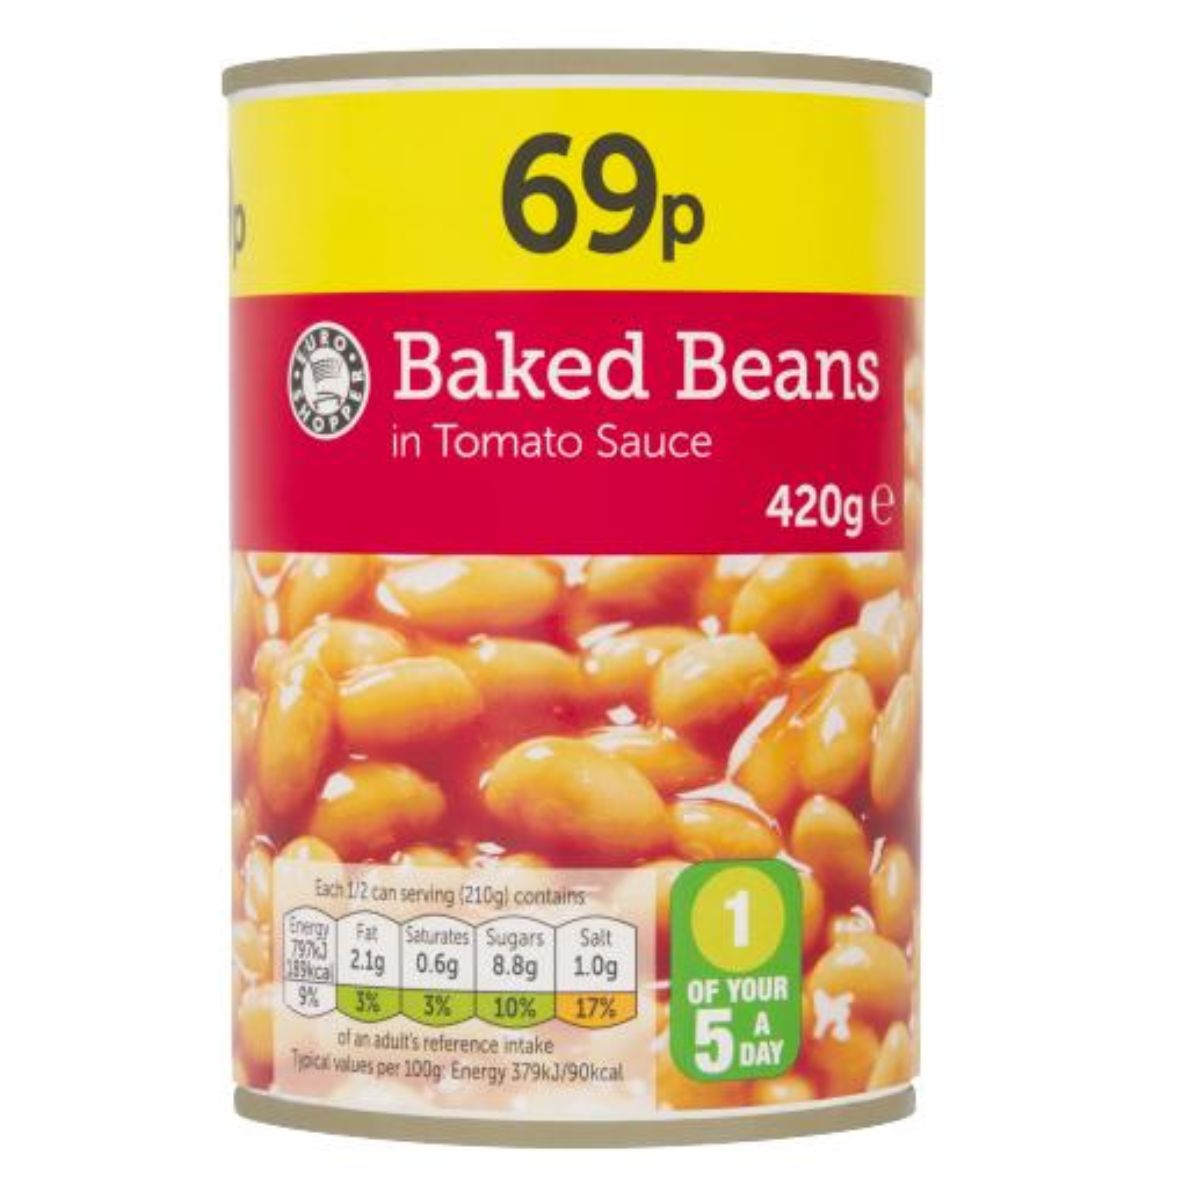 A Euro Shopper - Baked Beans in Tomato Sauce - 420g, labeled with nutritional information and priced at 69 pence.